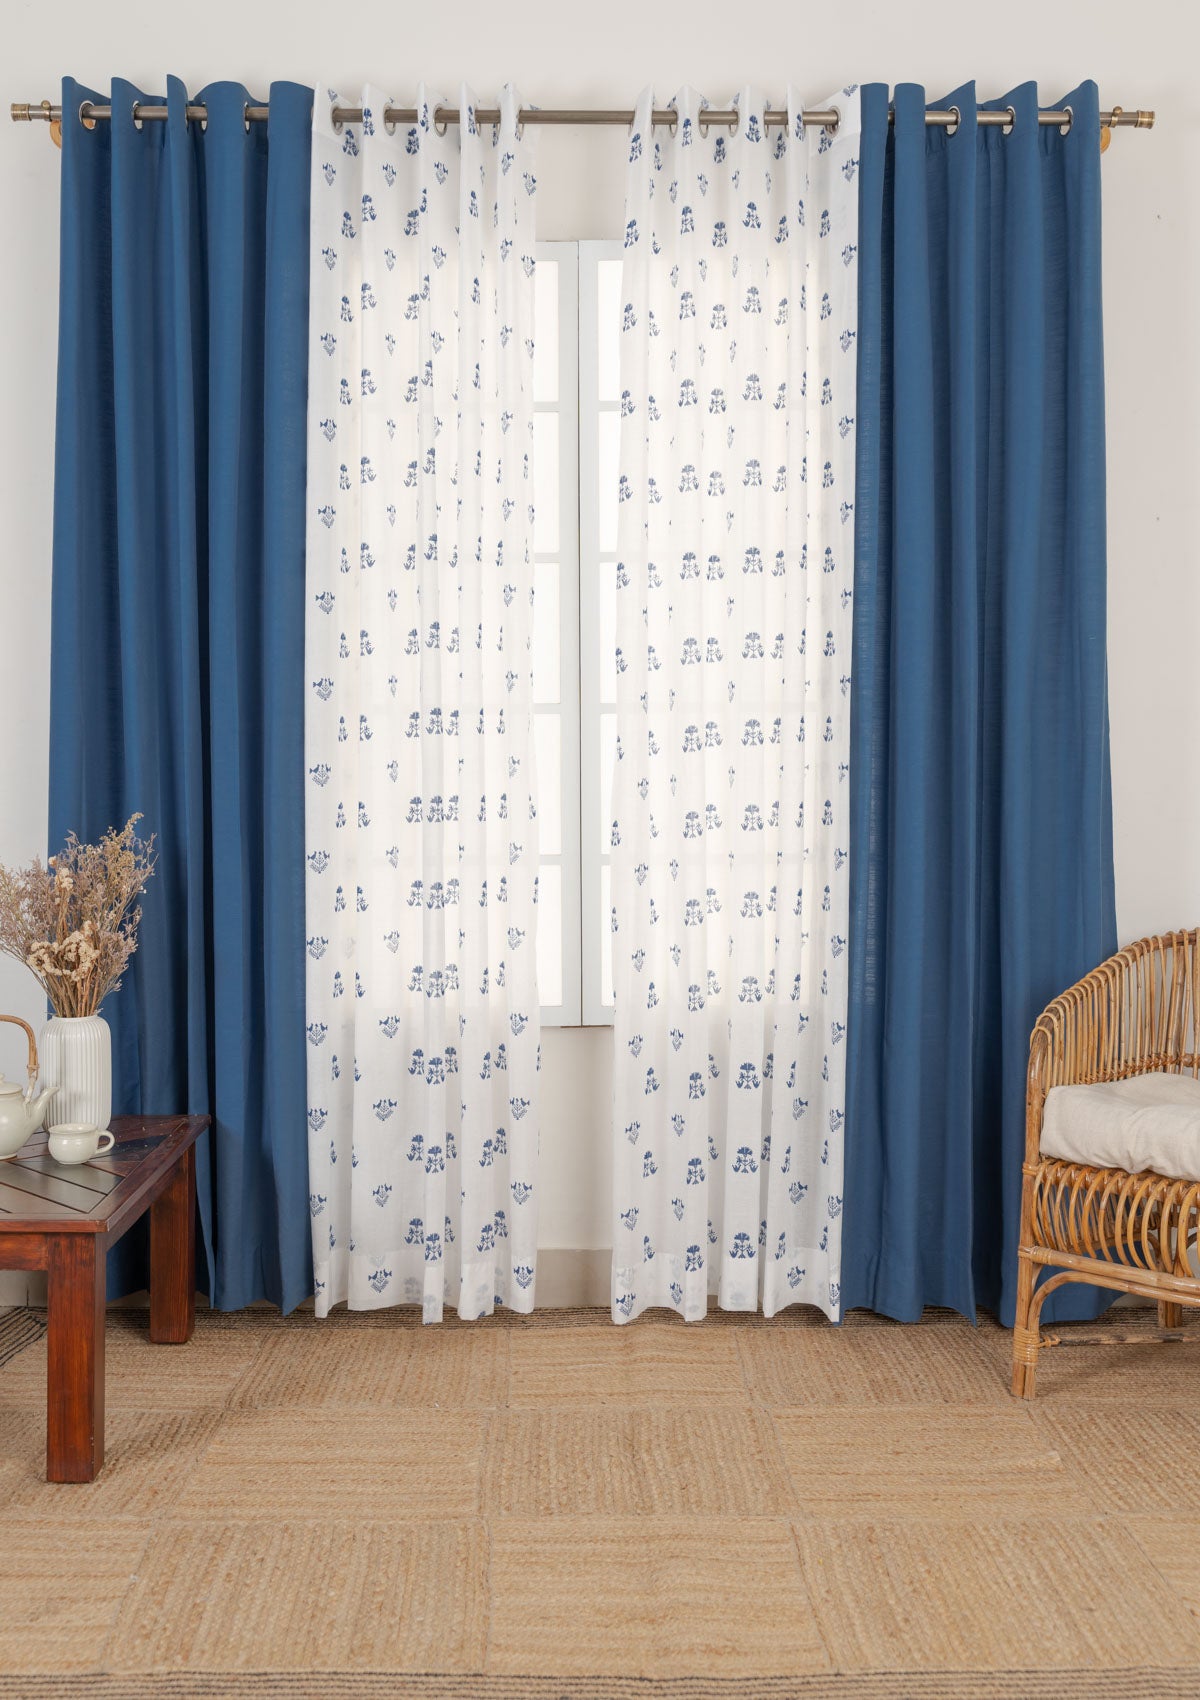 Solid Royal blue cotton curtain with Sunbird geometric sheer 100% cotton curtains for living room - Set of 4